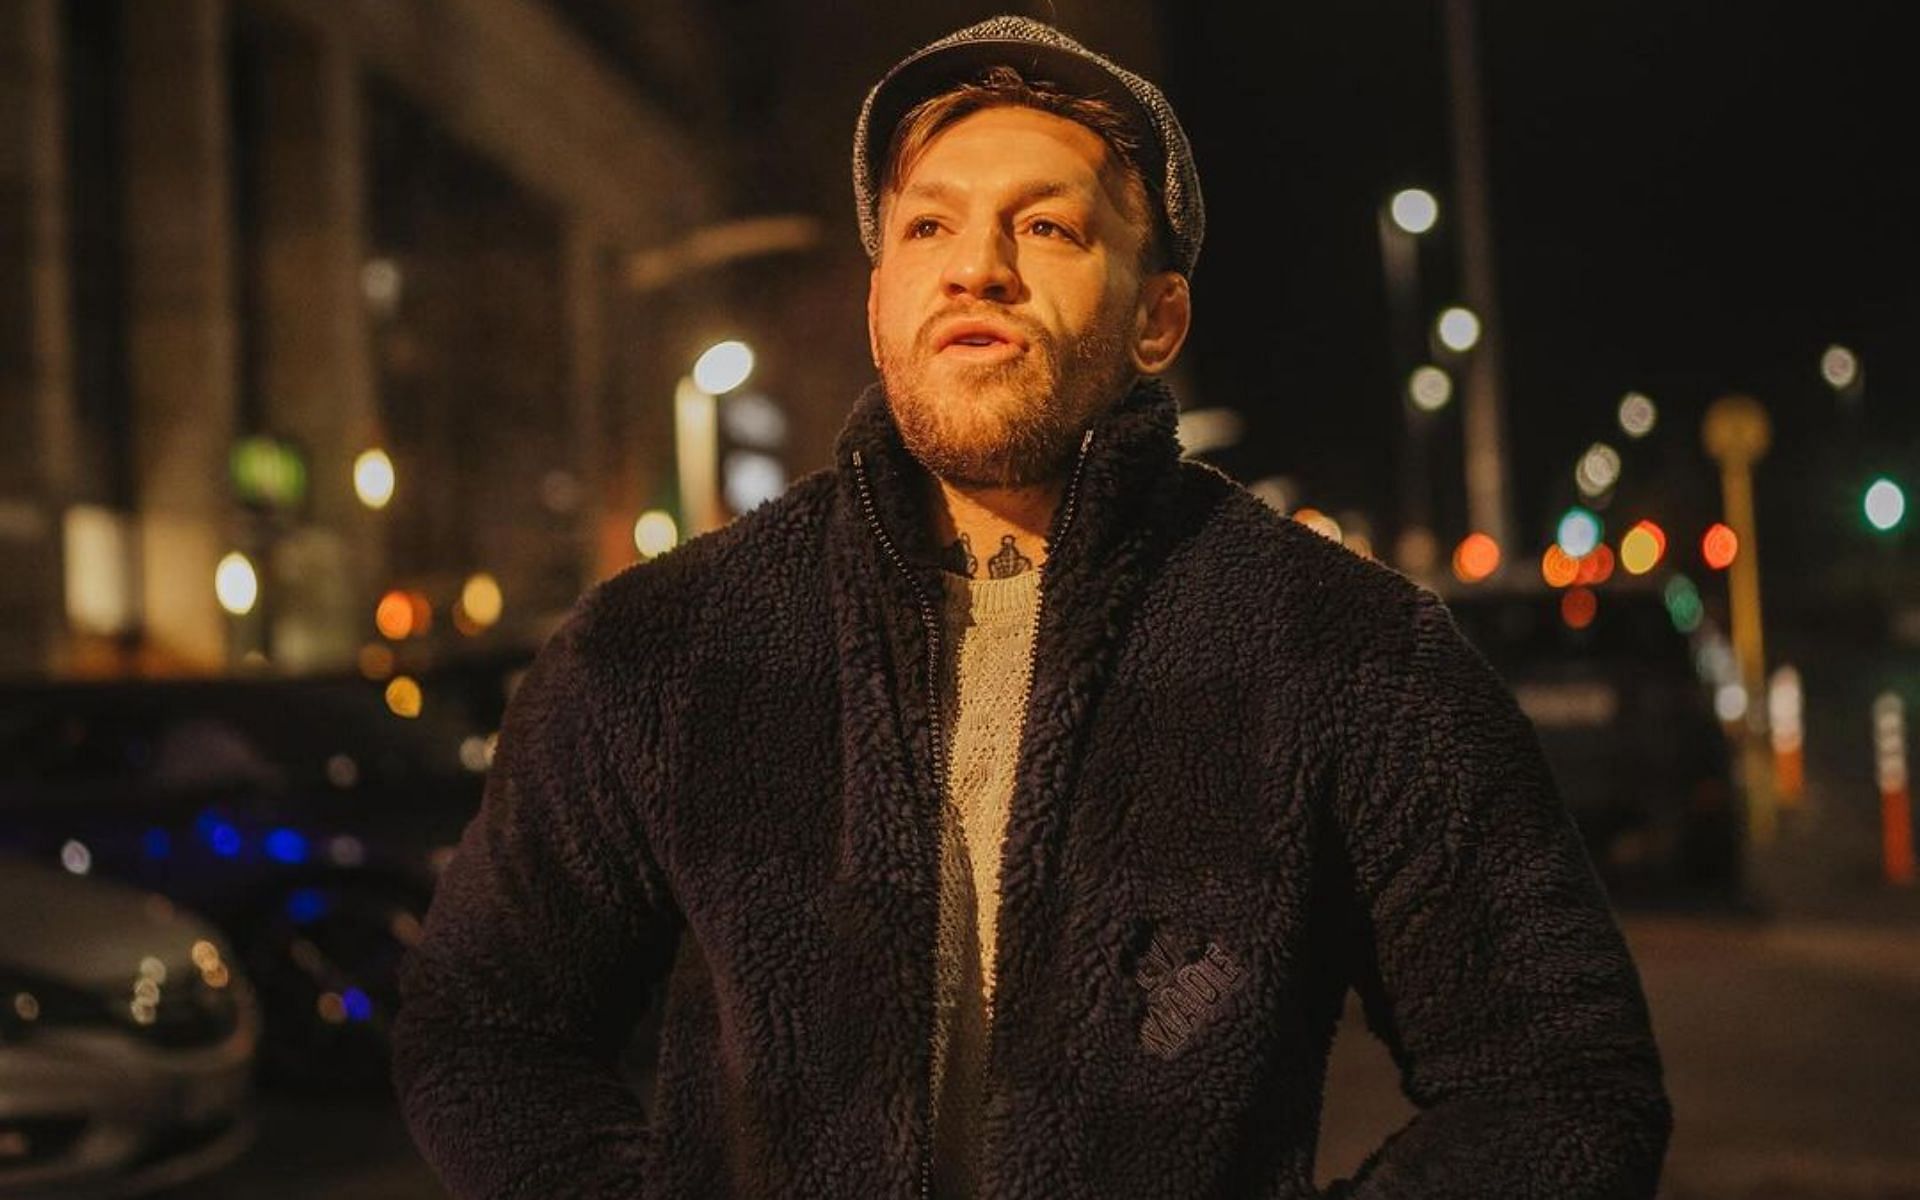 Former UFC two-division champion Conor McGregor advocates for changes in Irish immigration system